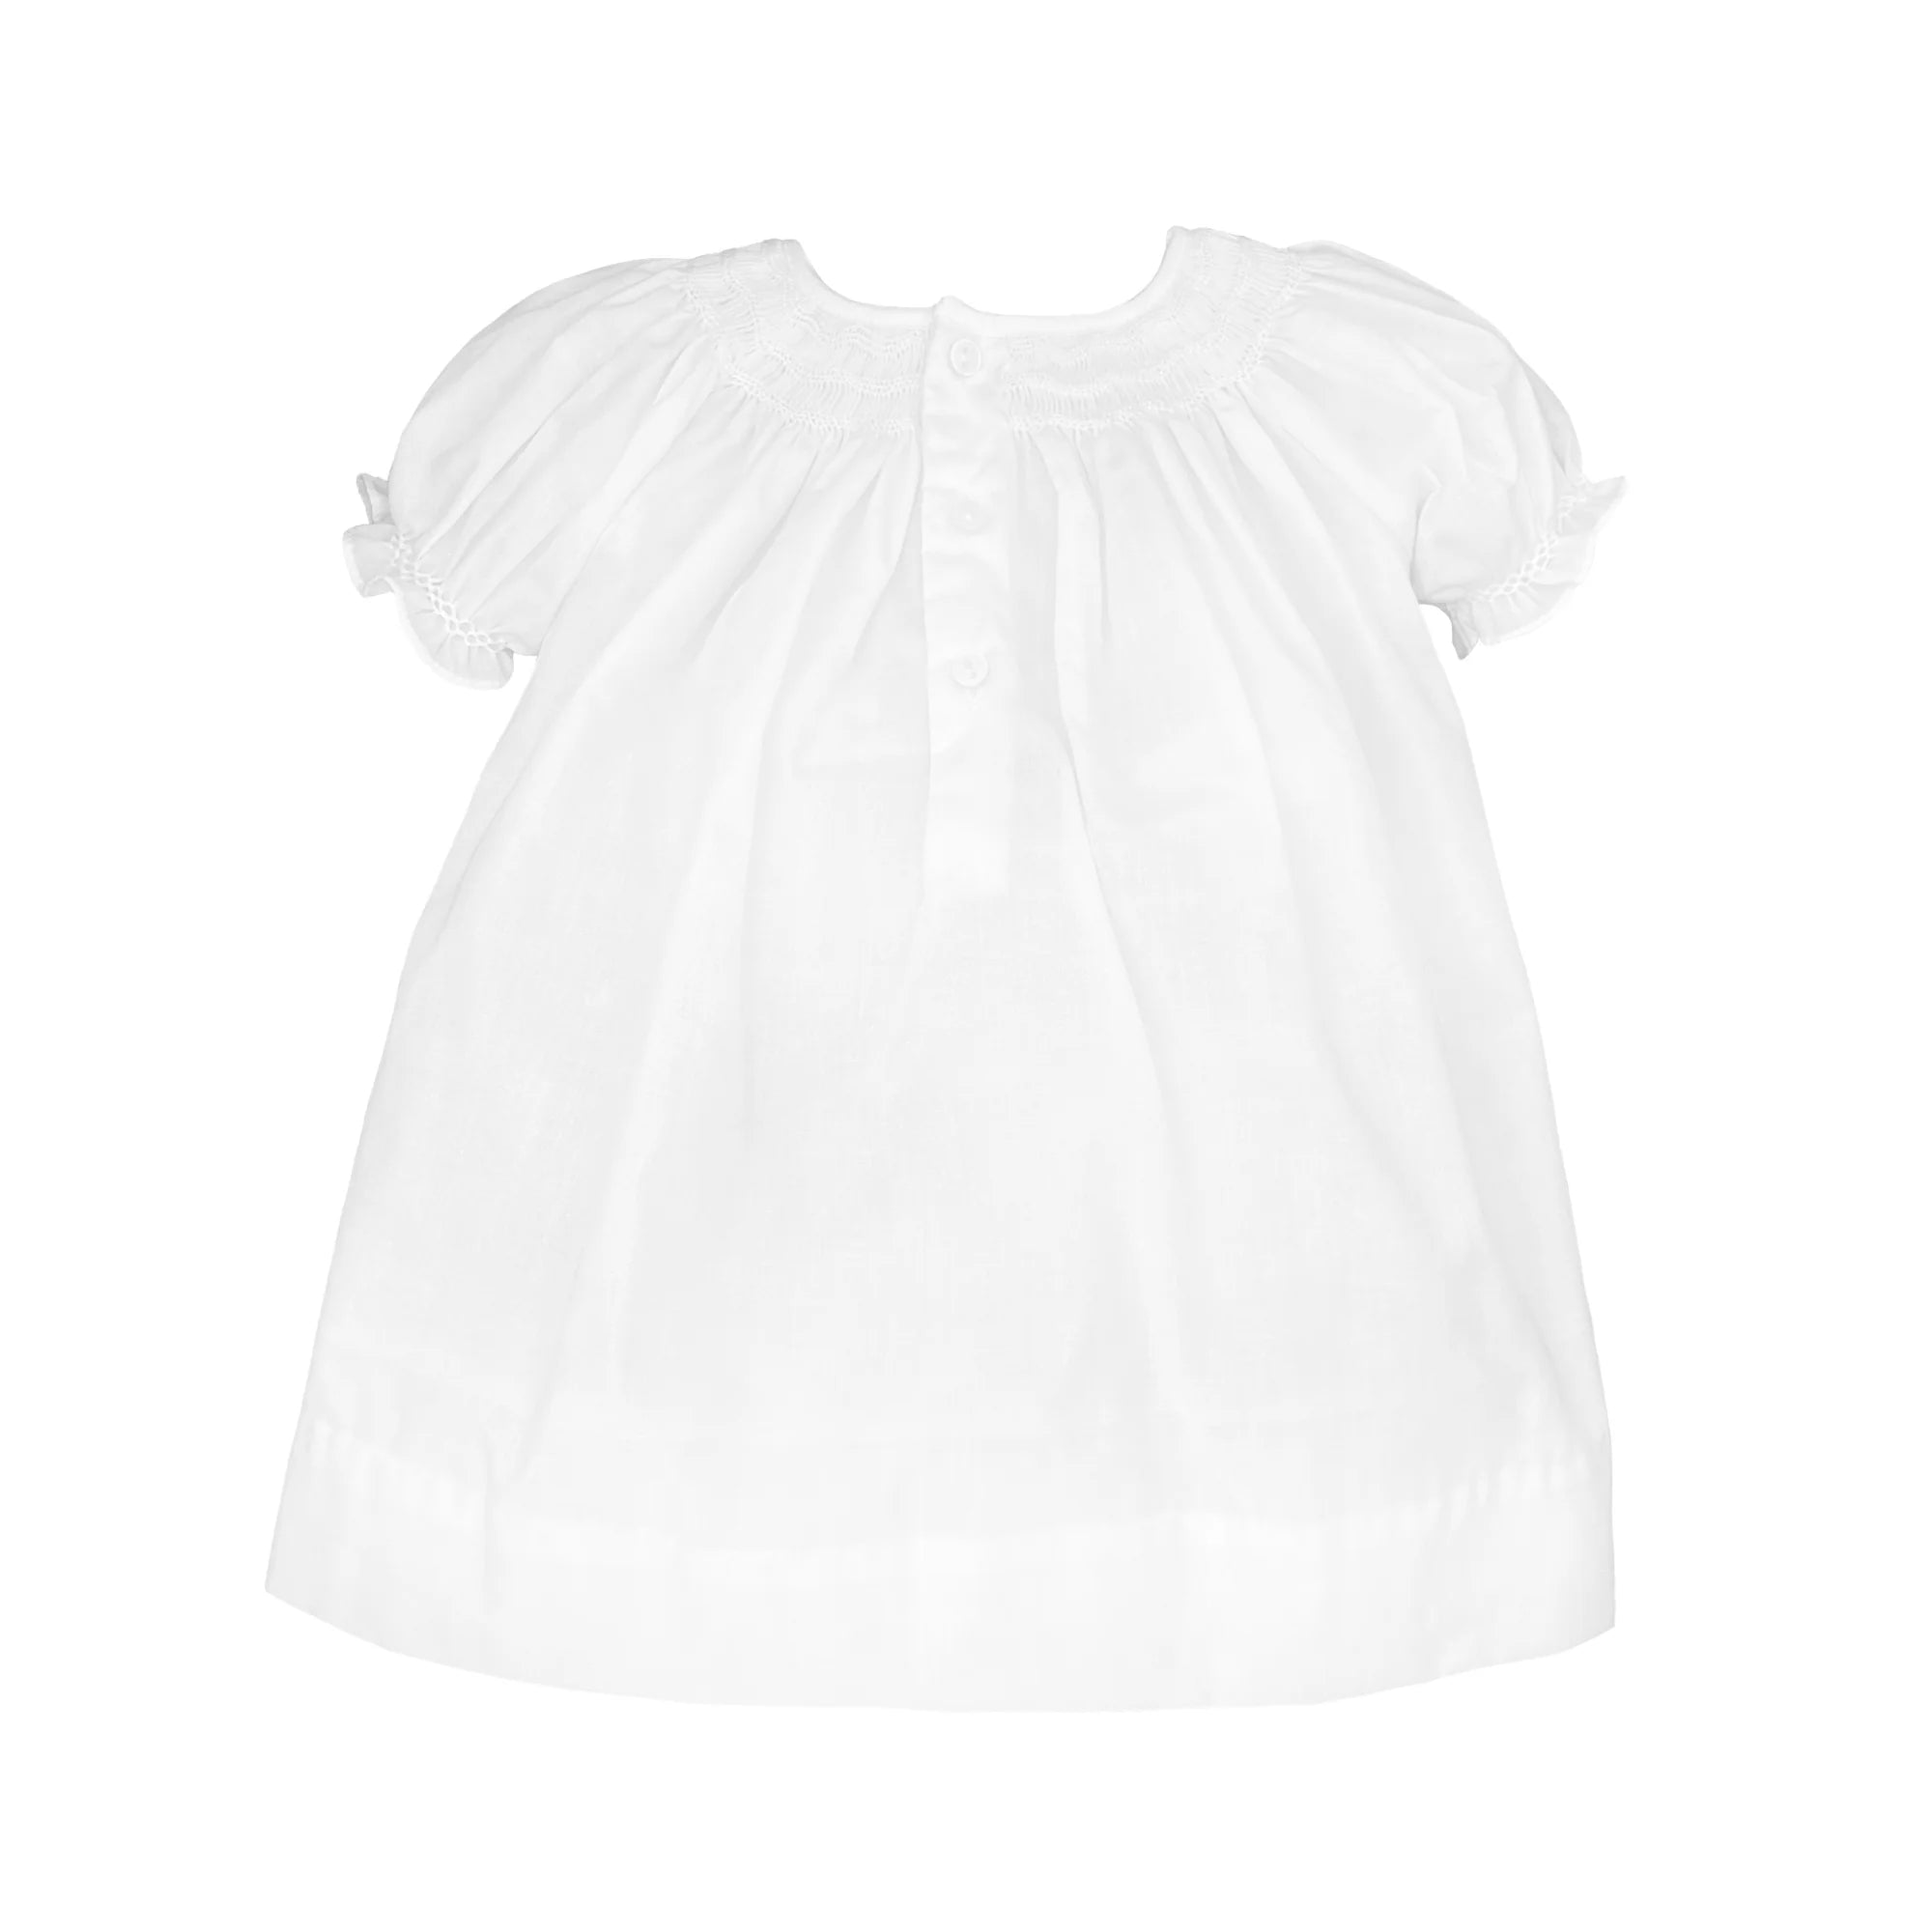 BABY GIRL WHITE WAVE SMOCKED DAYGOWN WITH MATCHING BONNET